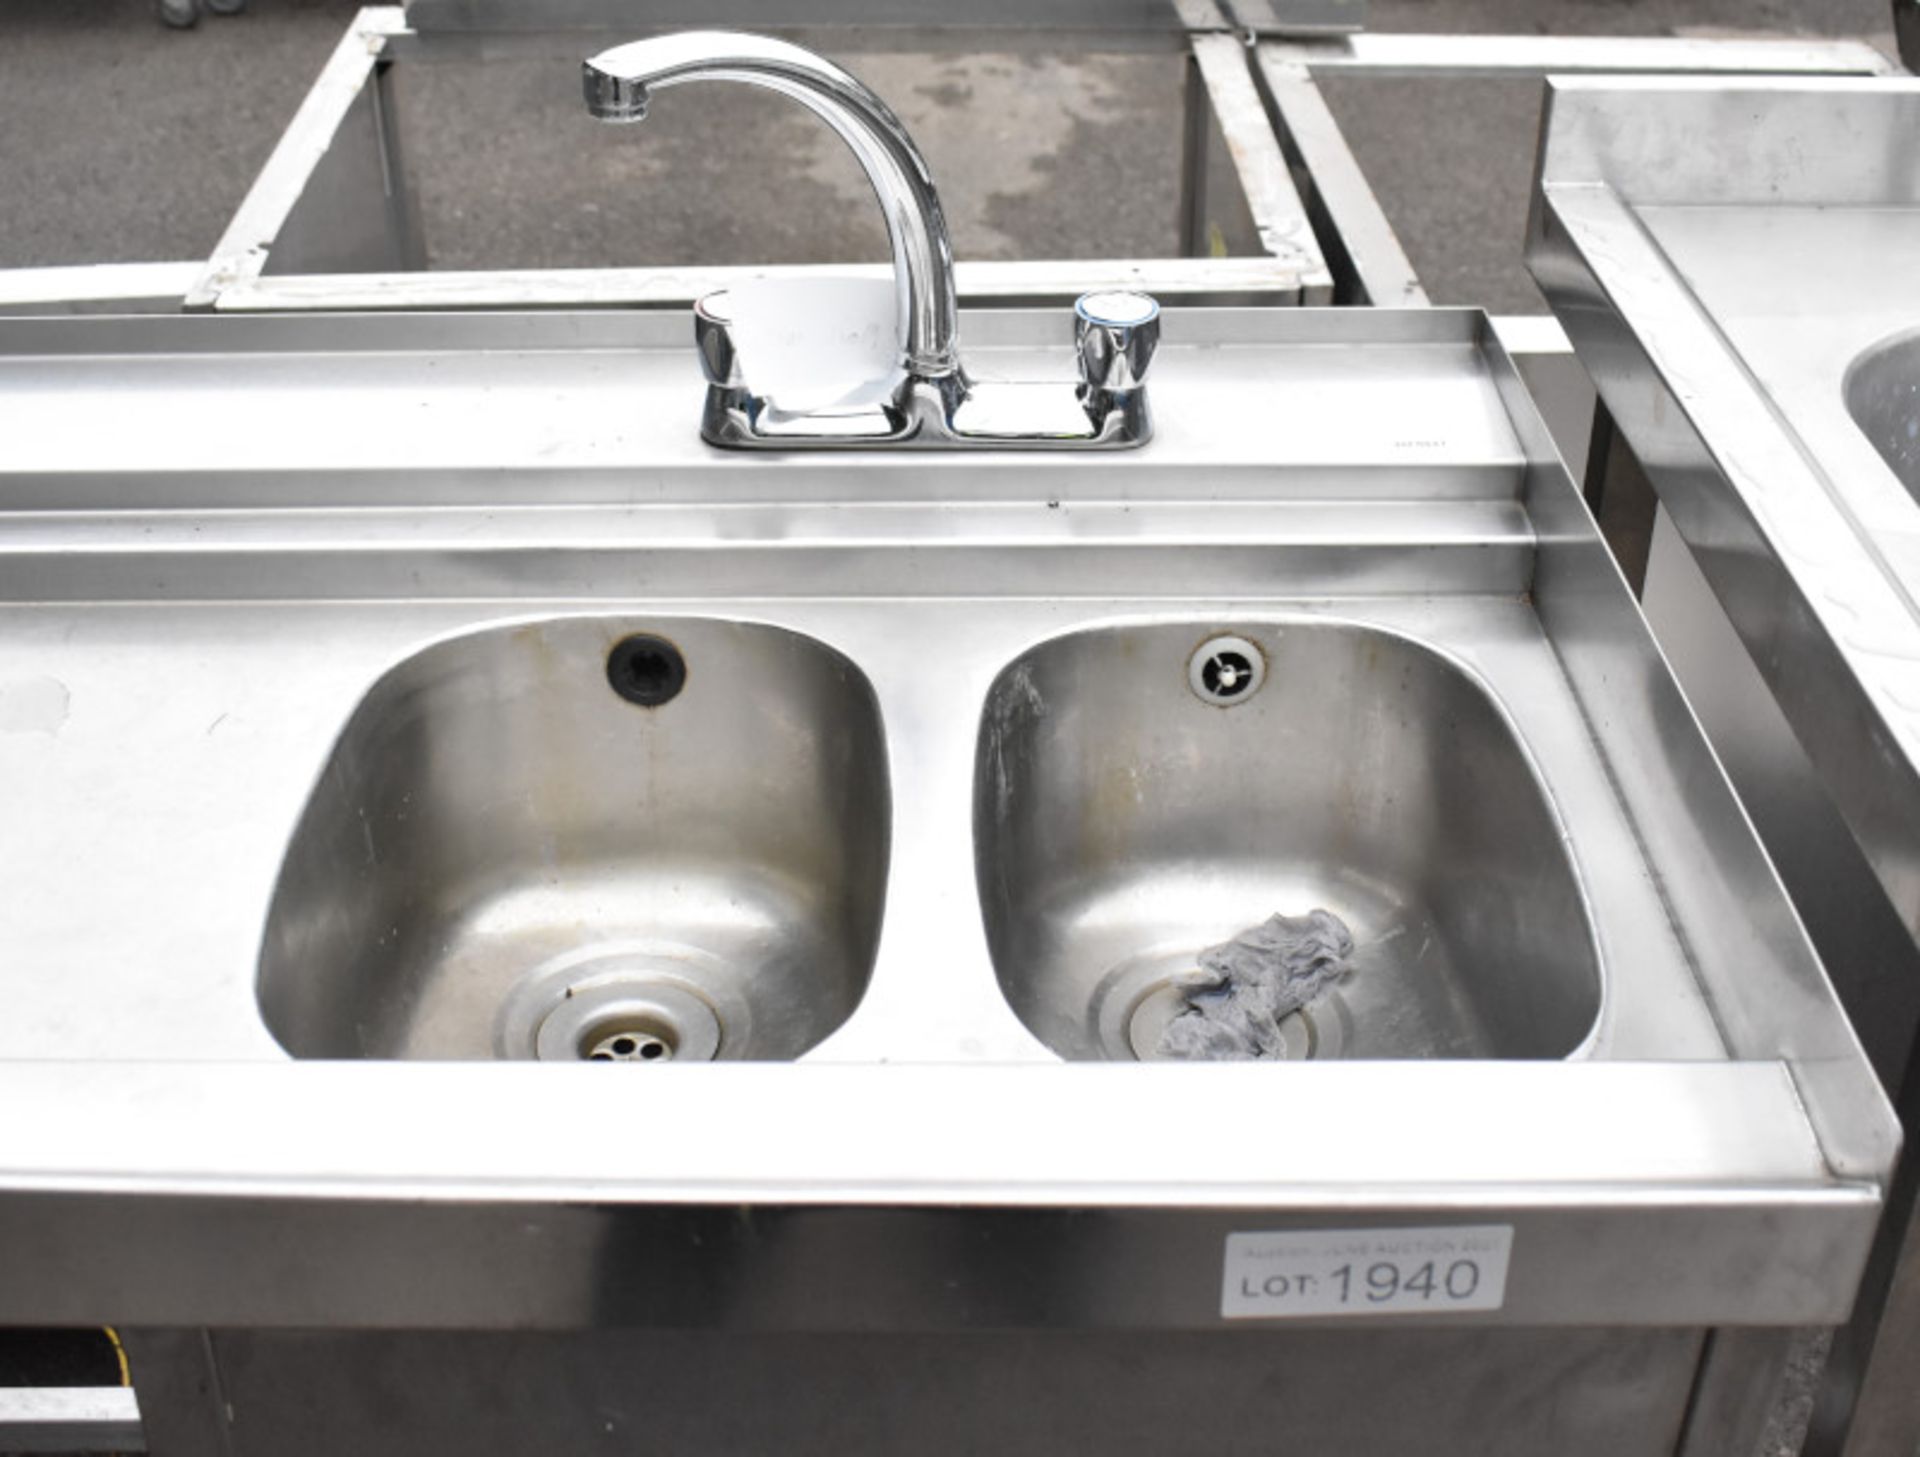 Double sink with drainer - W 1850mm x D 640mm x H 1020mm - Image 2 of 3